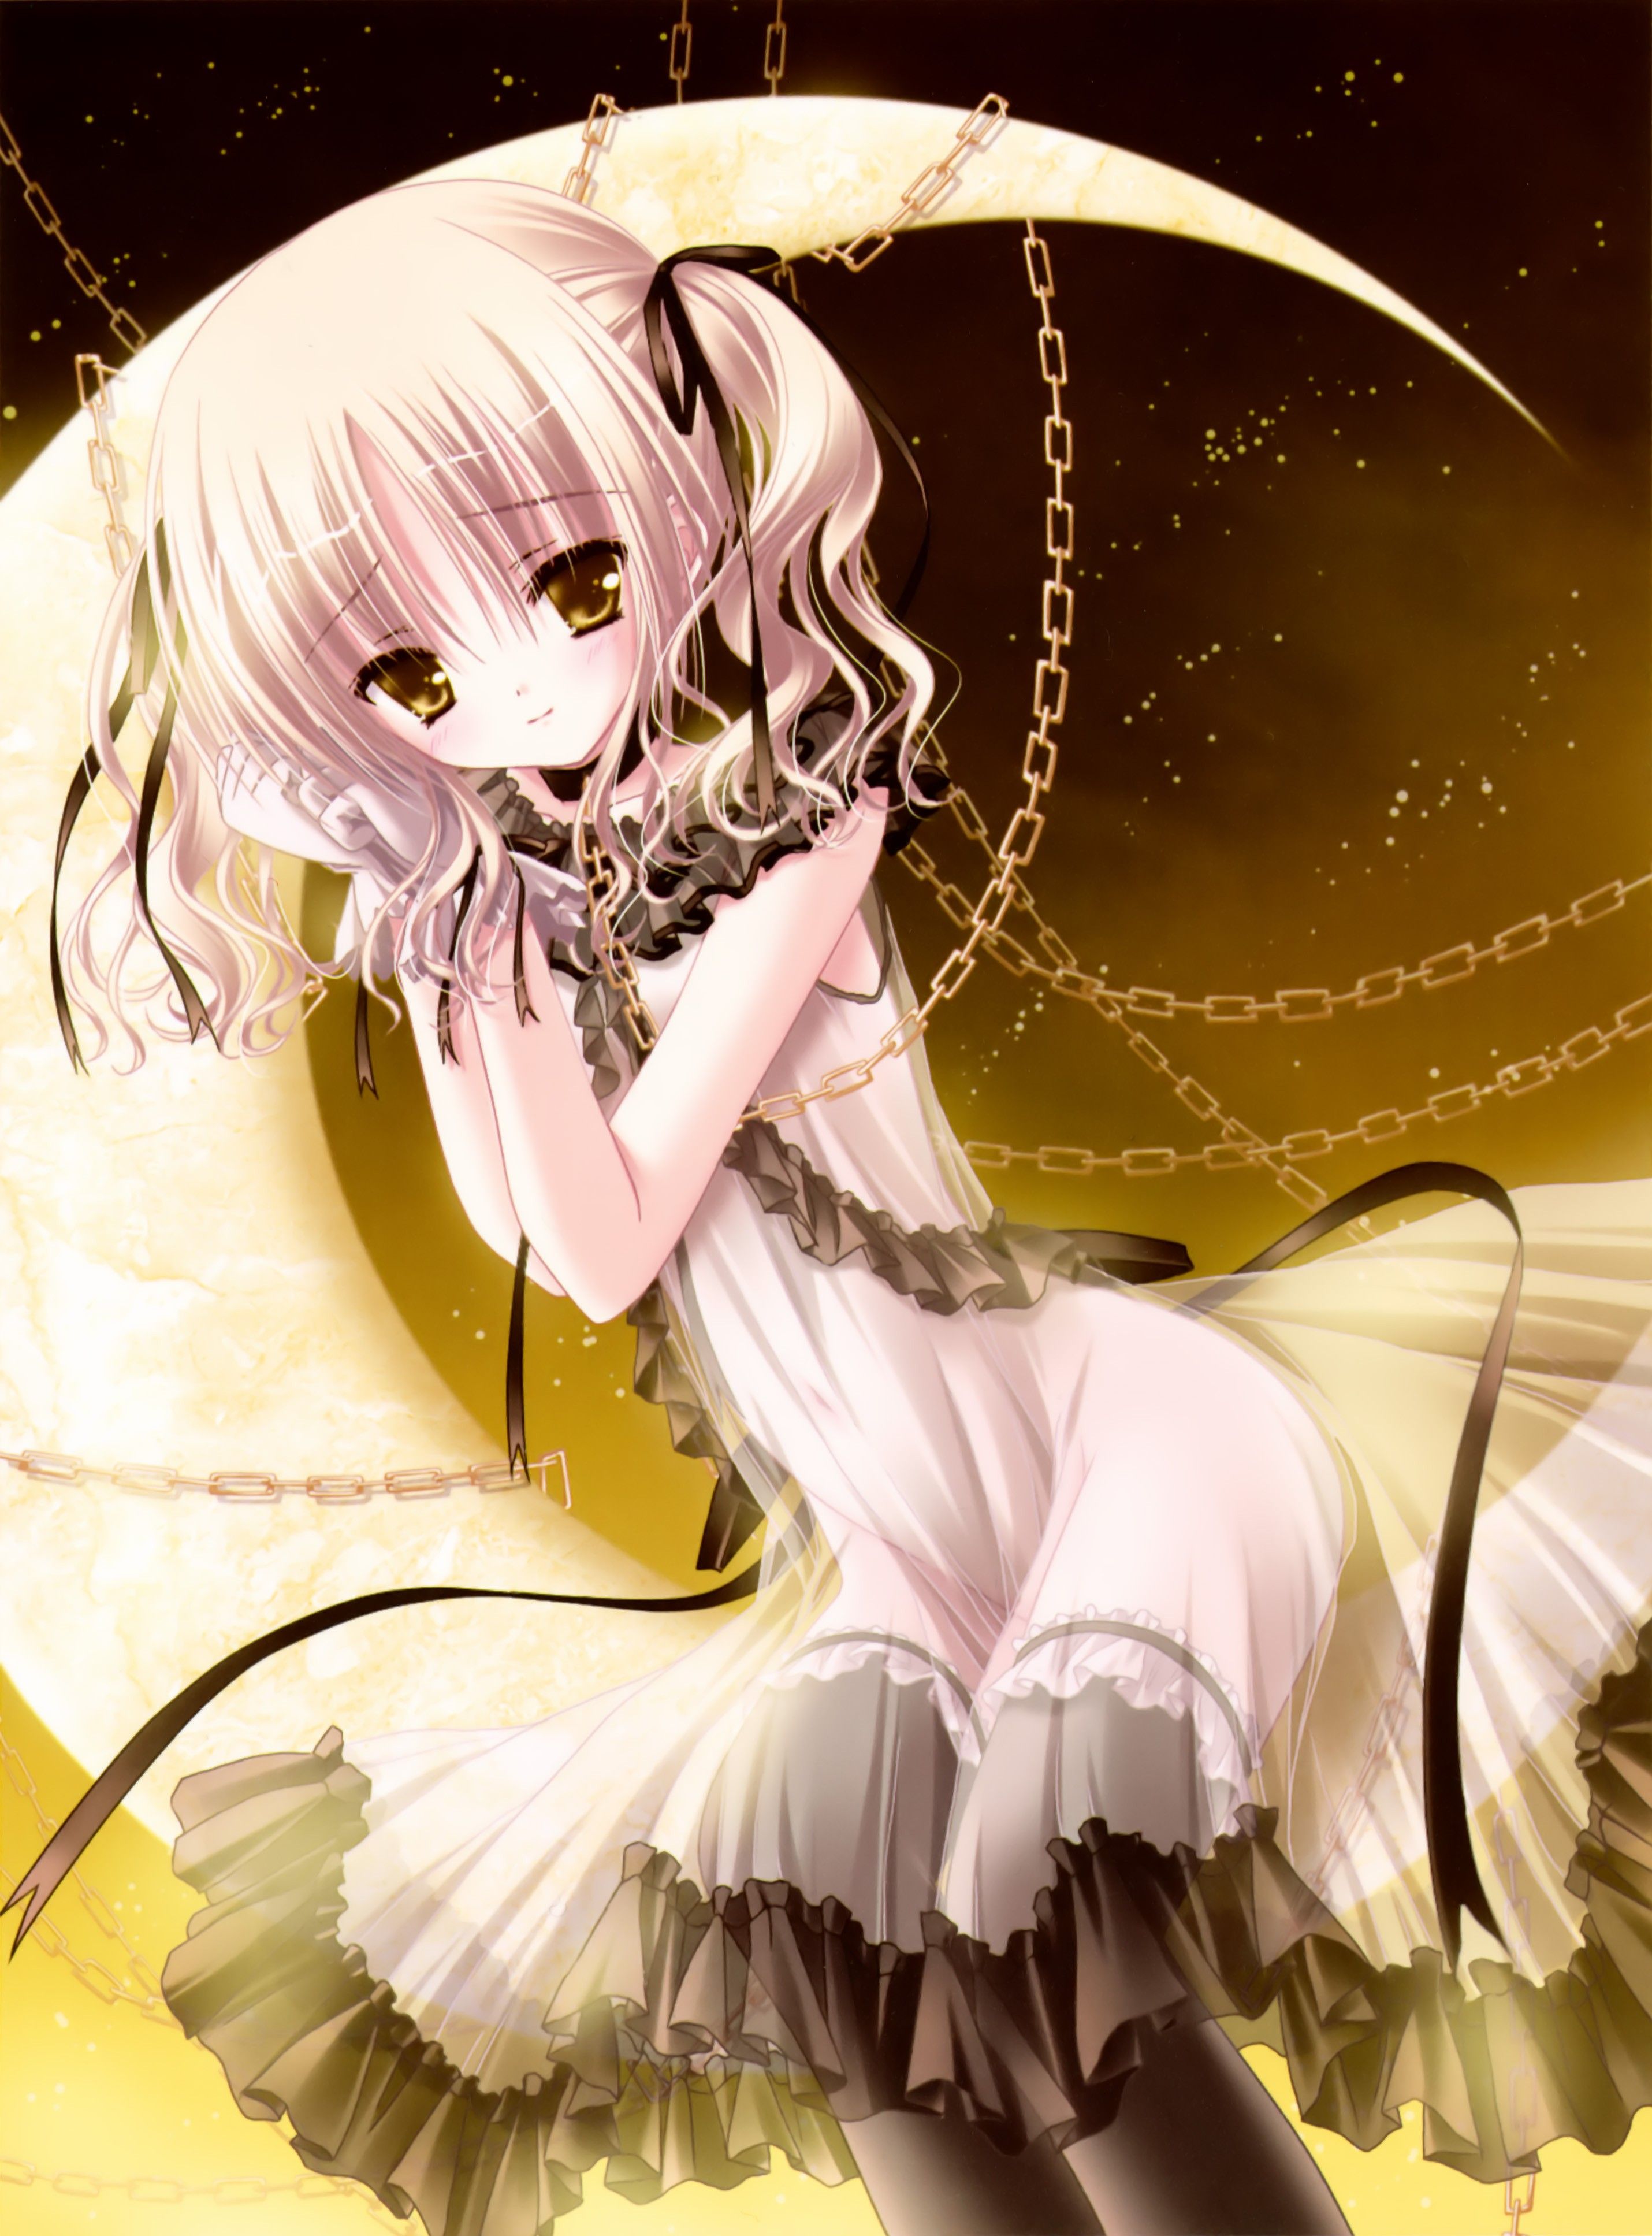 blondes, dress, Moon, ribbons, lolicon, anime, chains, Tinkle